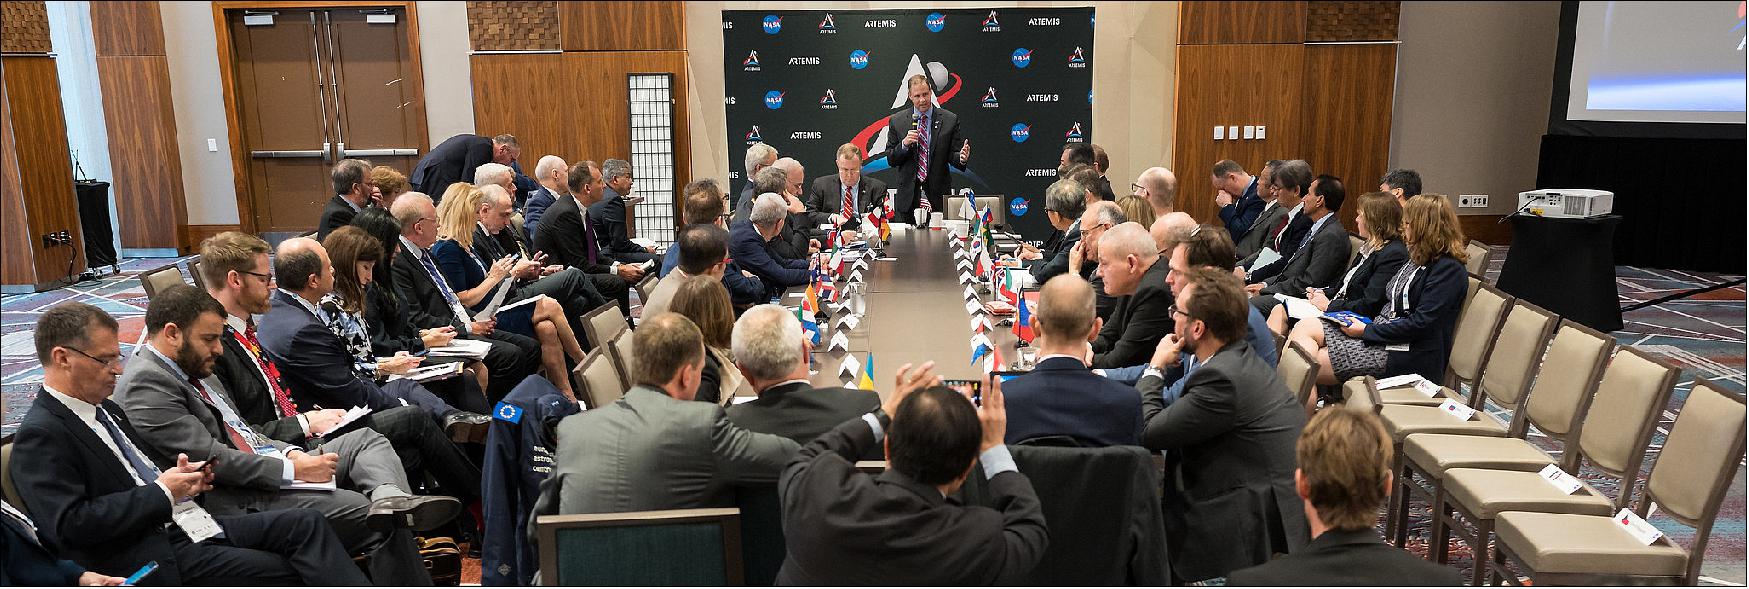 Figure 3: NASA Administrator Jim Bridenstine speaks during a multilateral meeting of the heads of space agencies at the 70th IAC (International Astronautical Congress), Tuesday, 22 October 2019 in Washington D.C. (image credit: NASA/Aubrey Gemignani)